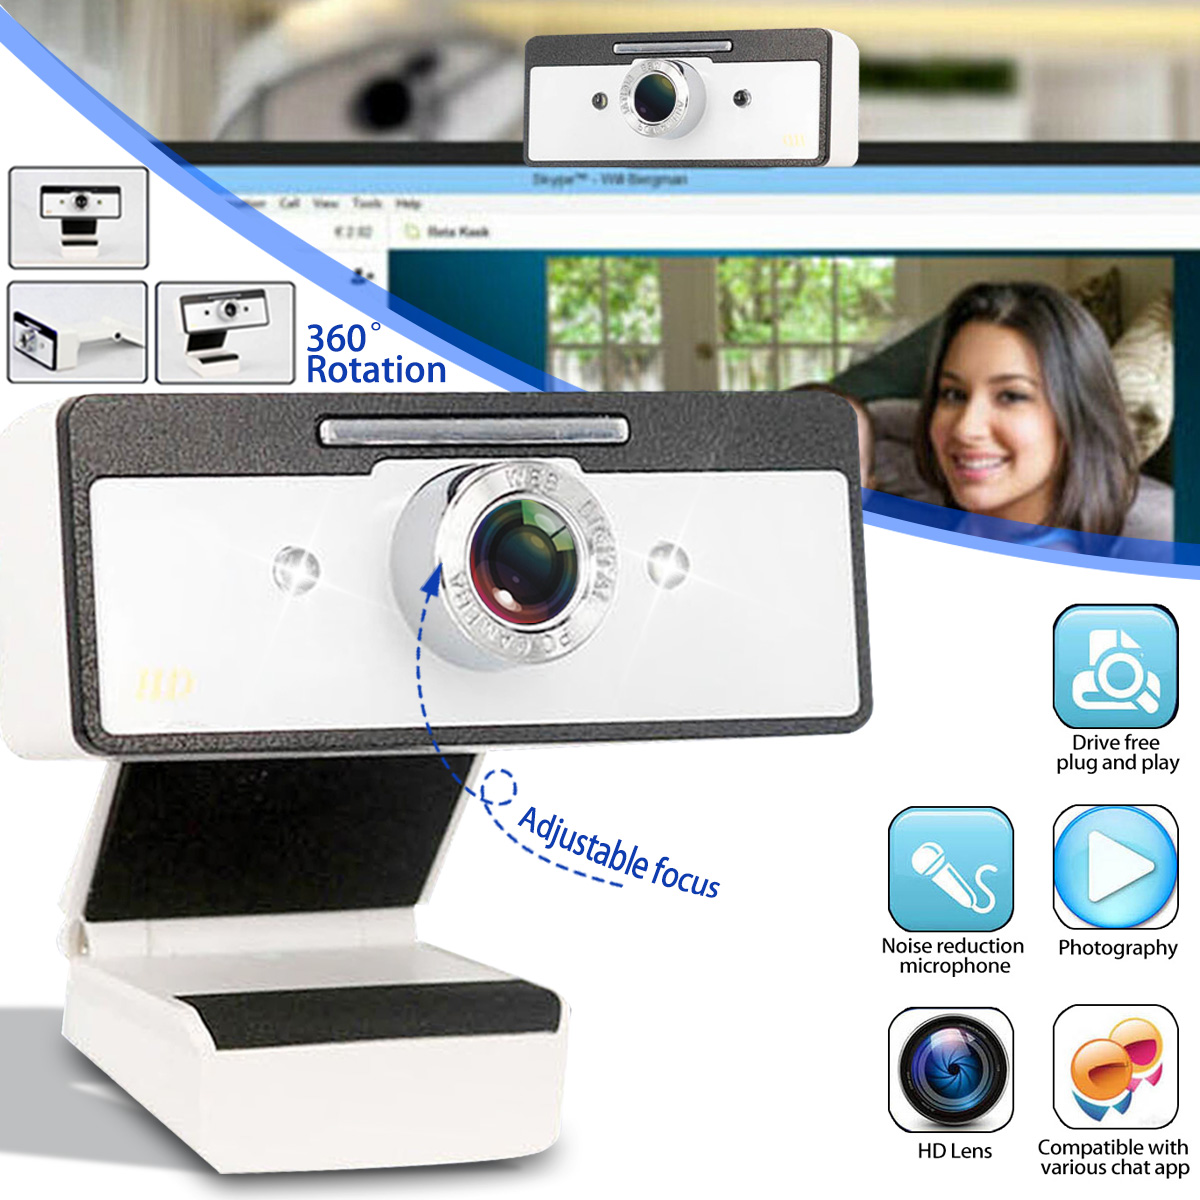 Rotatable-USB-20-HD-Webcam-PC-Laptop-Camera-With-Microphone-Auto-Focus-Home-Office-Online-Course-Vid-1674078-1